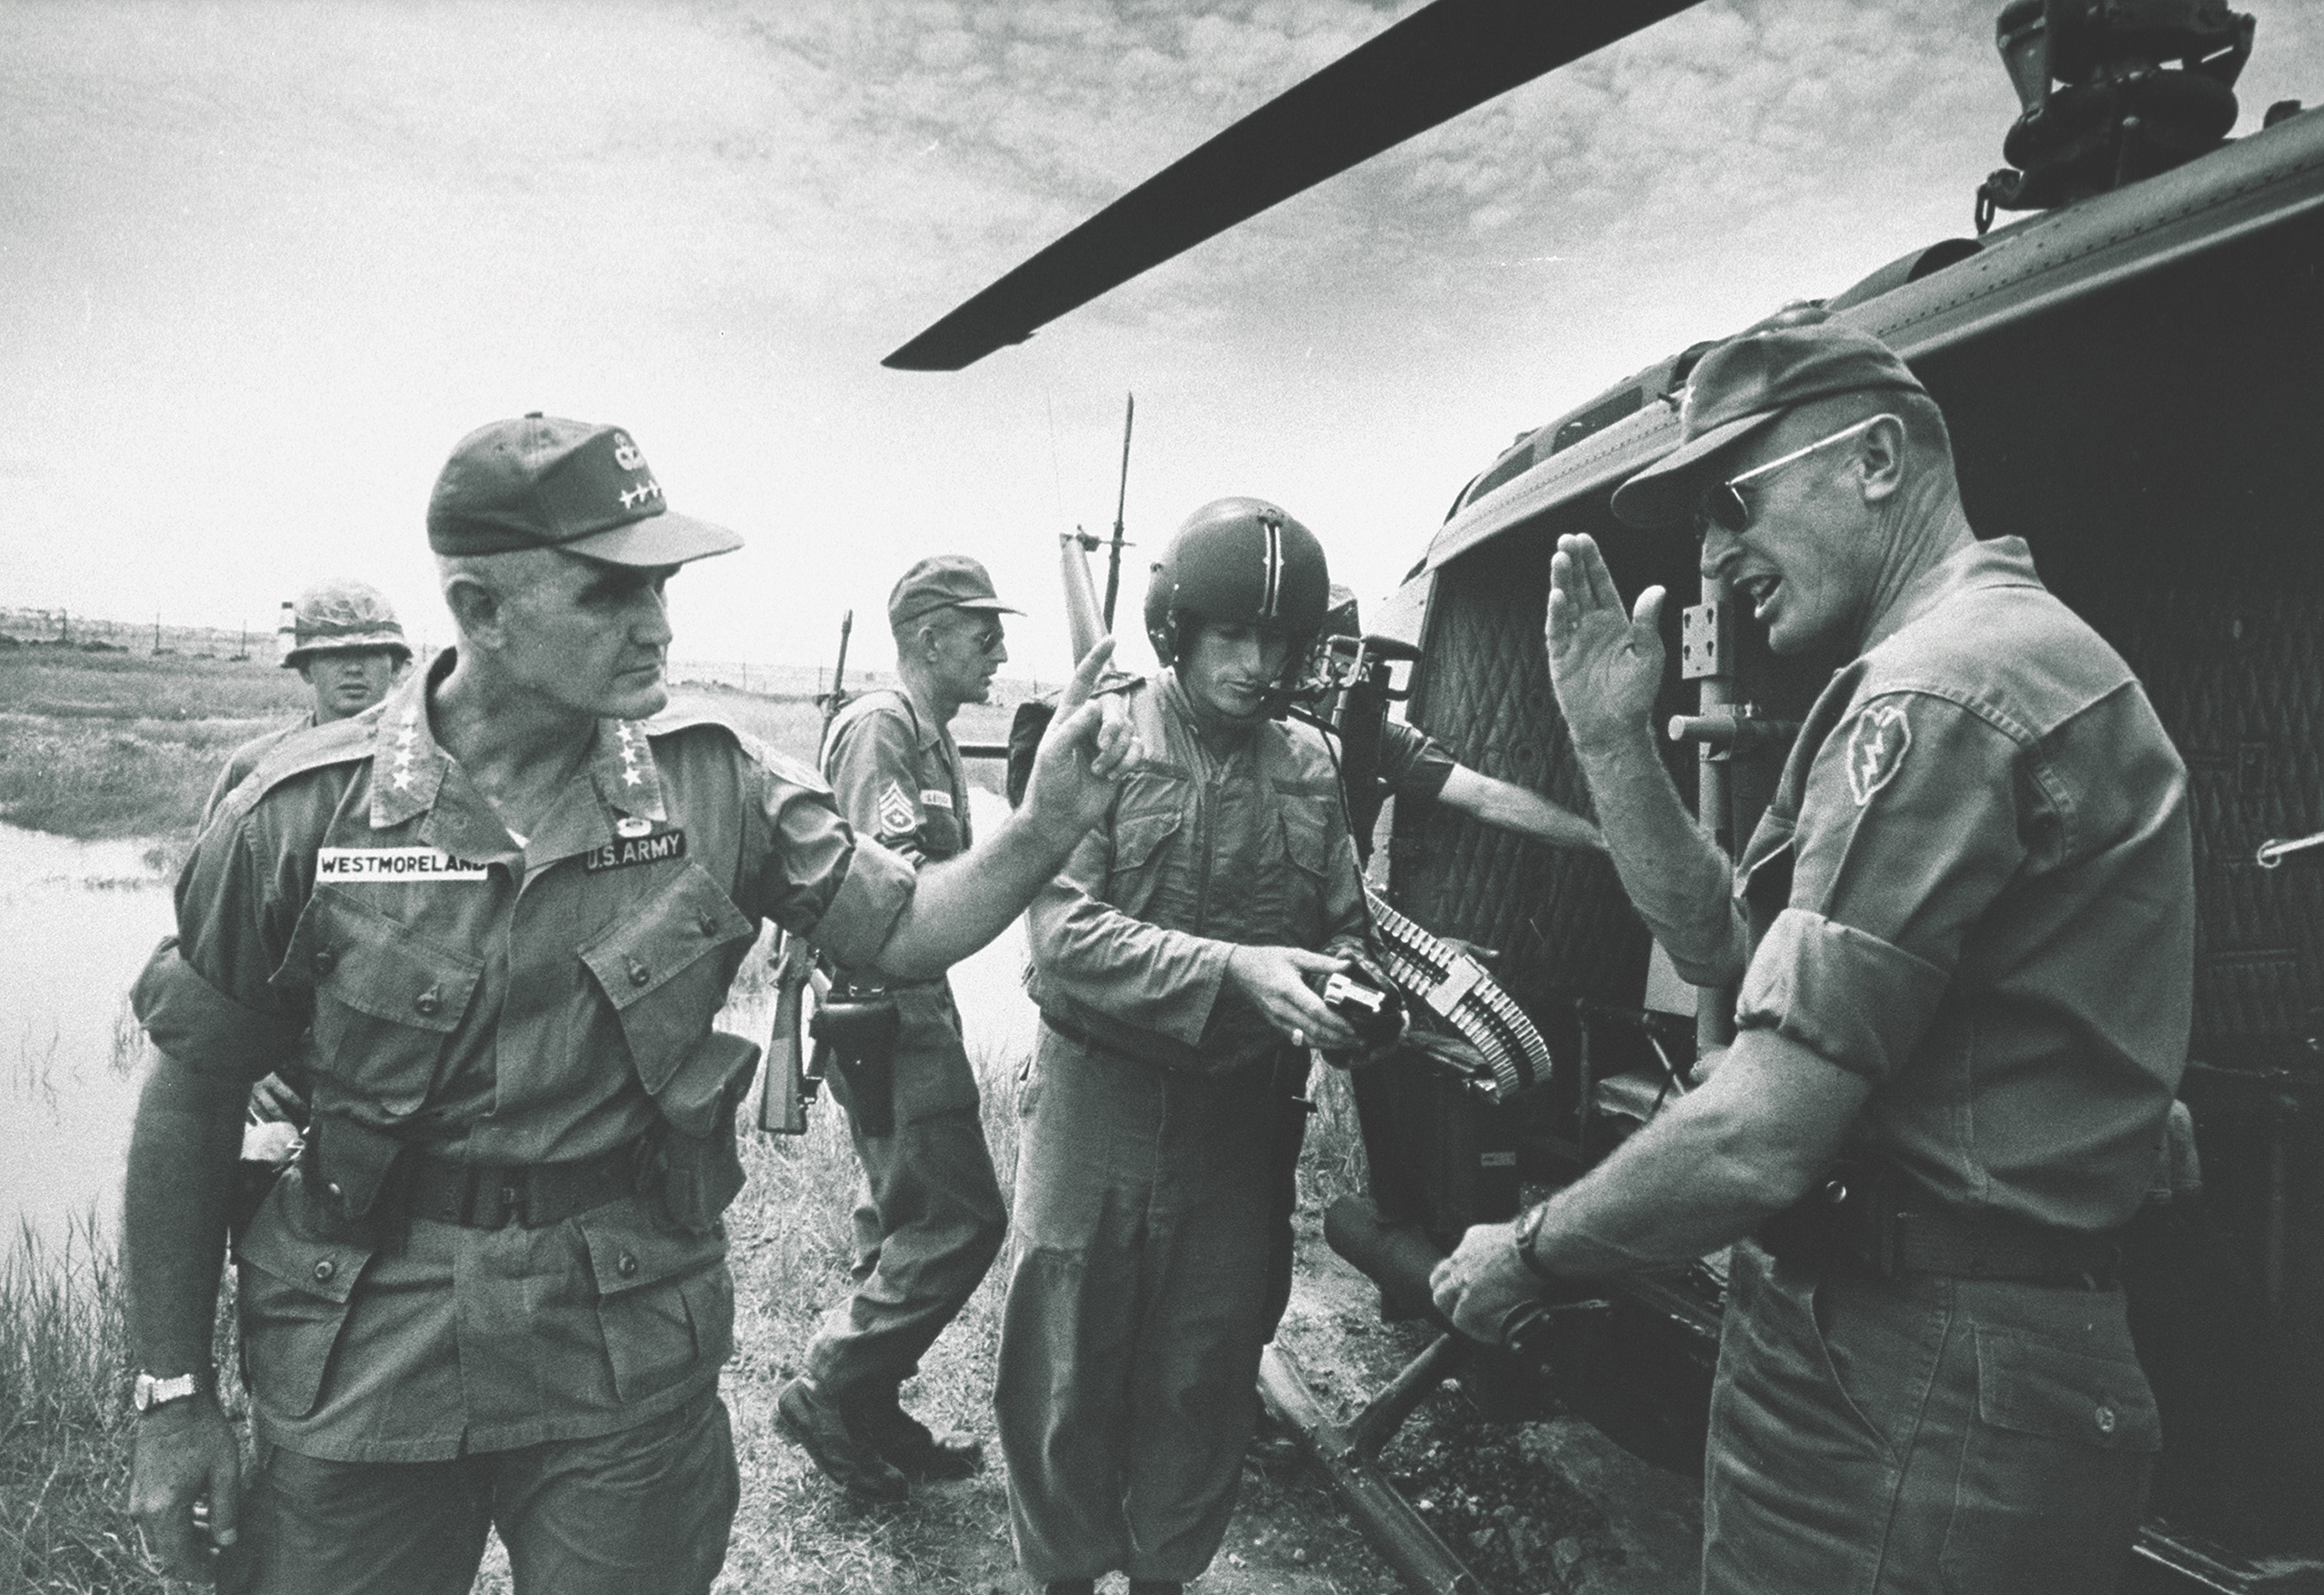 Gen. William Westmoreland, the top U.S. commander in Vietnam, approaches Frederick Weyand, commander of the 25th Infantry Division, in 1966. Westmoreland was warned on Jan. 30, that an attack was imminent. Weyand had already put his troops on alert. (Co Rentmeester/The Life Picture Collection via Getty Images)